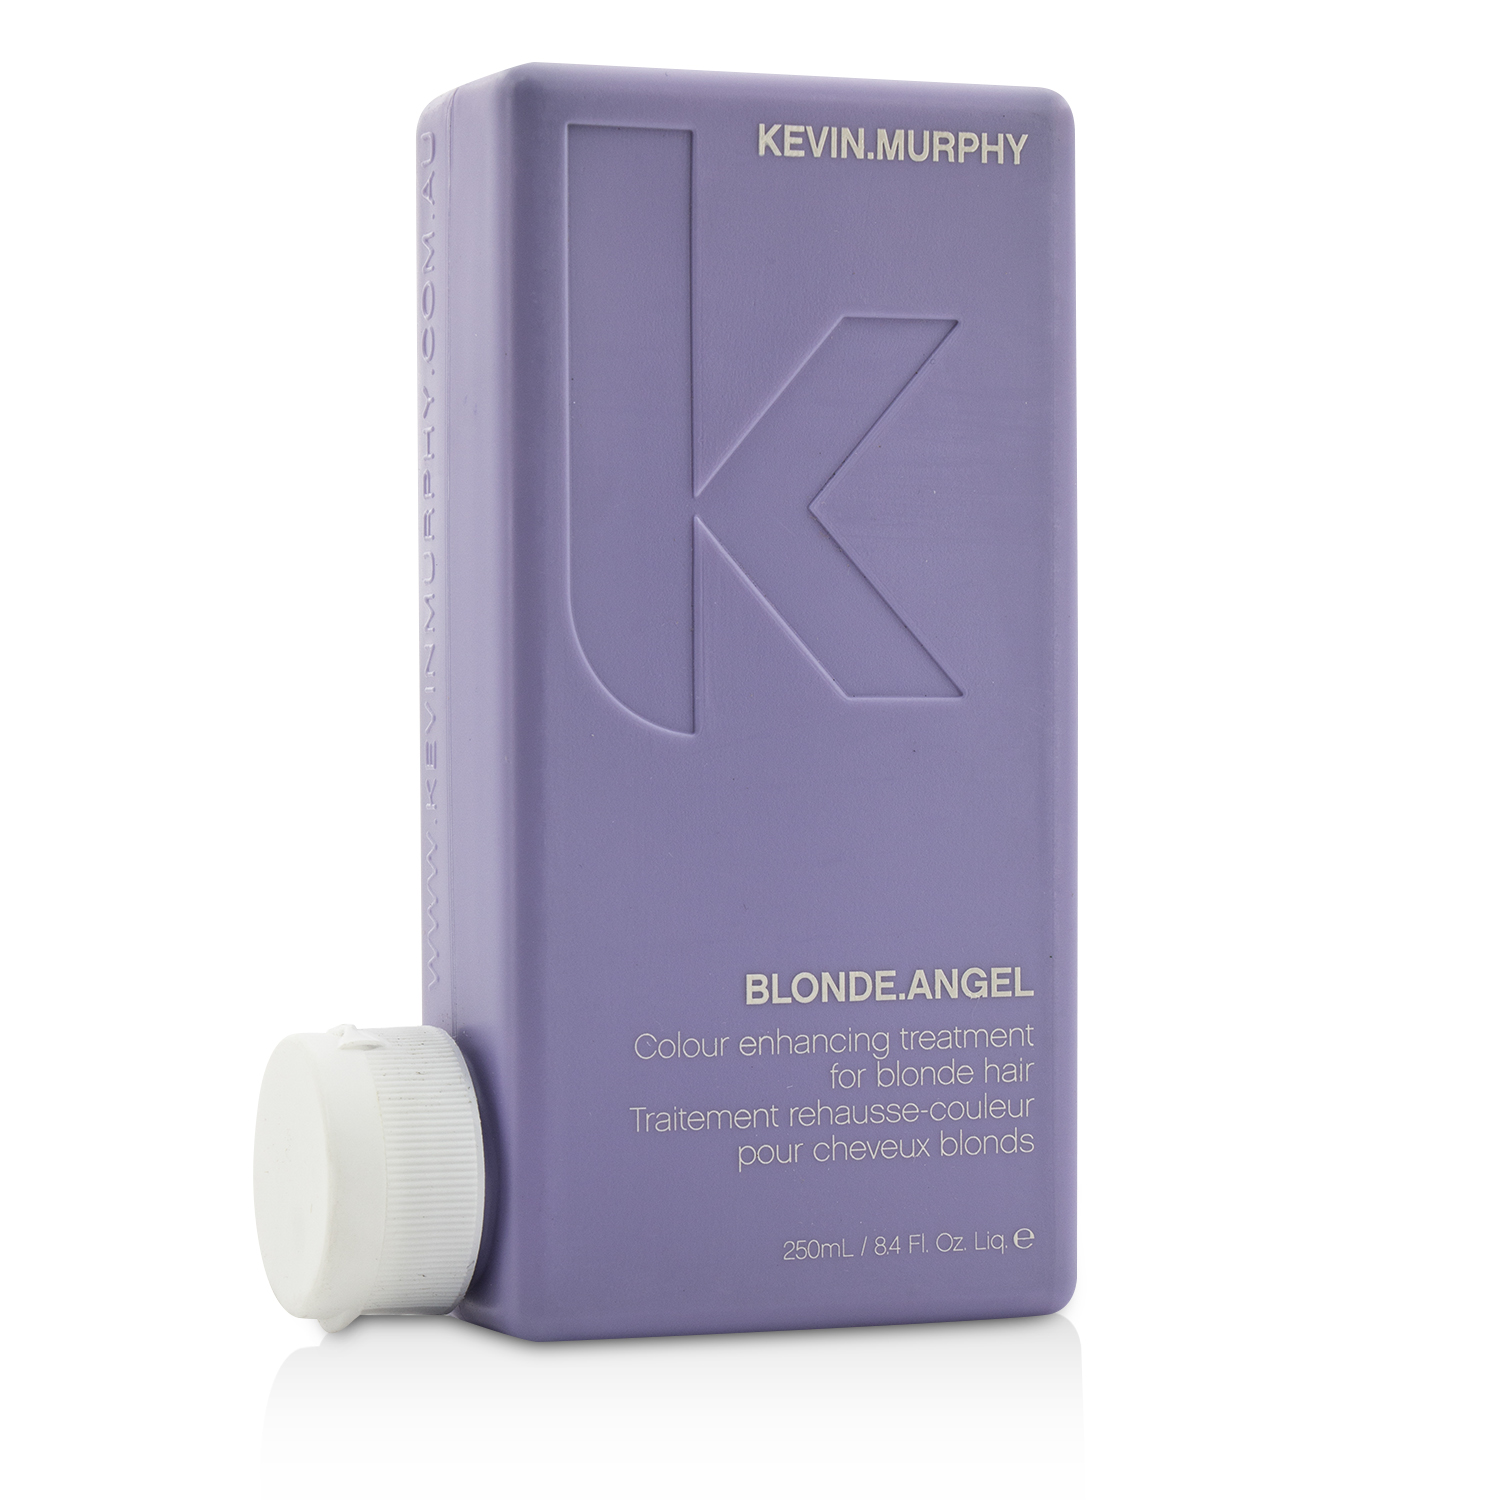 Blonde.Angel Colour Enhancing Treatment (For Blonde Hair) Kevin.Murphy Image